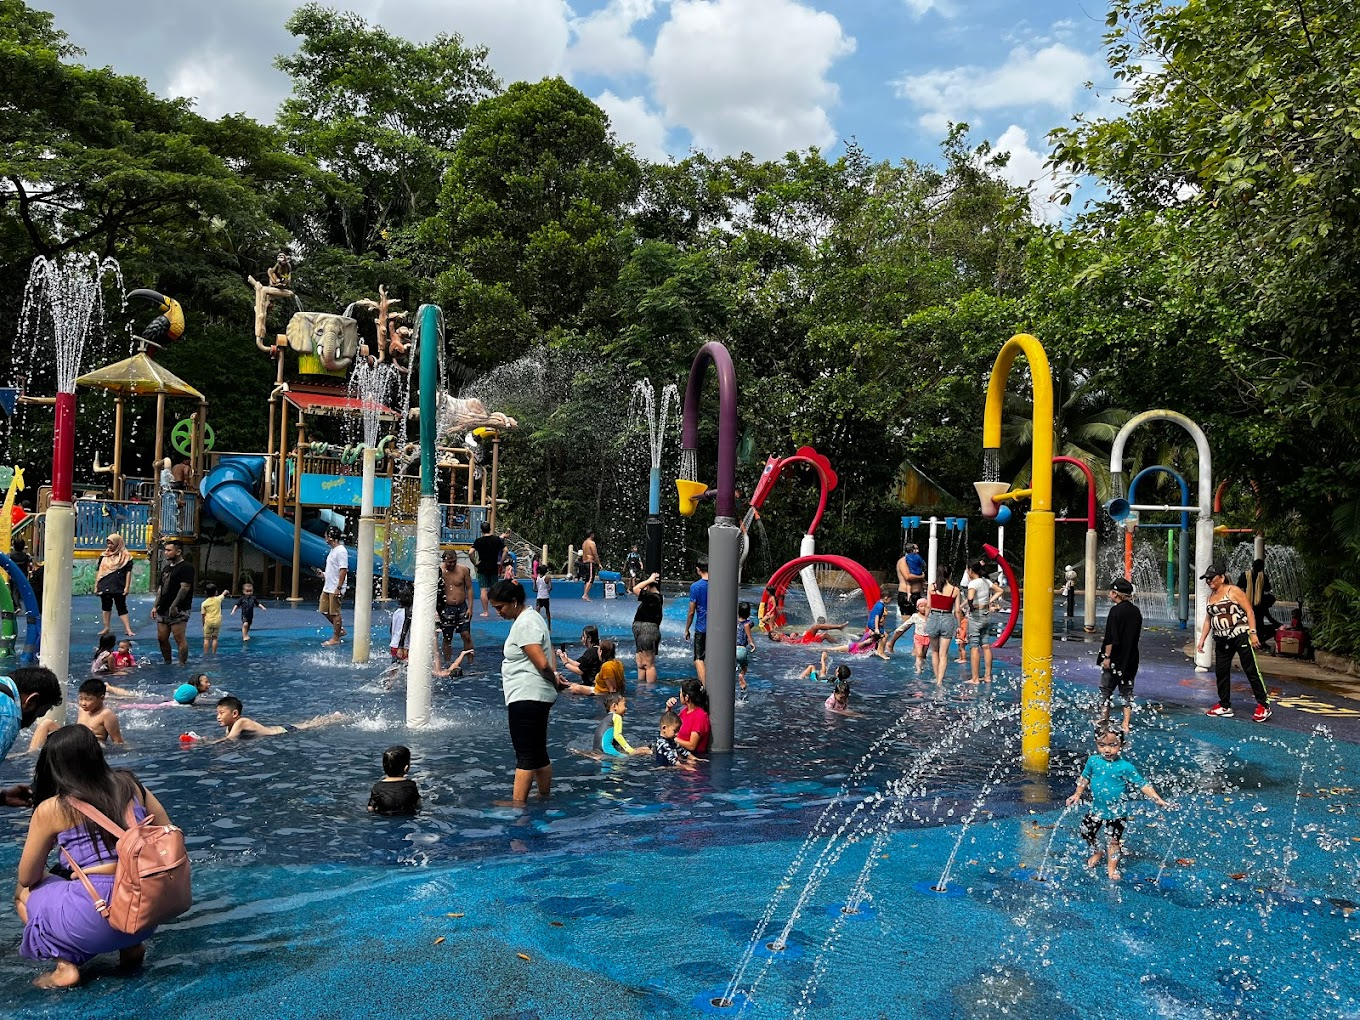 Water play area featuring splashing buckets, rain arches, water showers, and slides, located in Singapore Zoo with nearby food and beverage options.